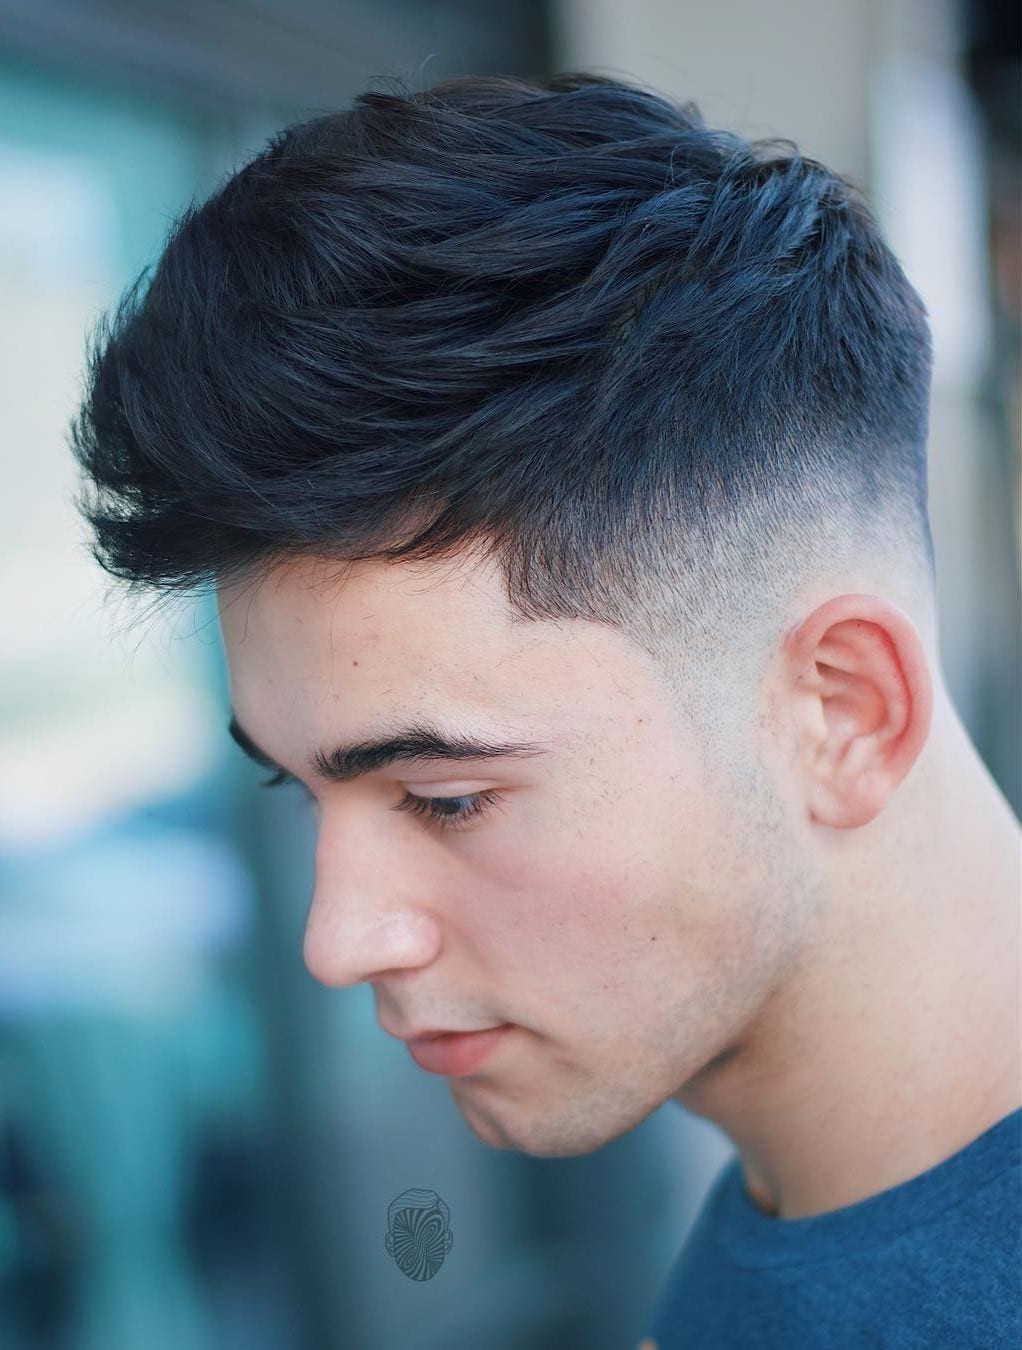 Hairstyles For Teen Boys
 50 Best Hairstyles for Teenage Boys The Ultimate Guide 2019